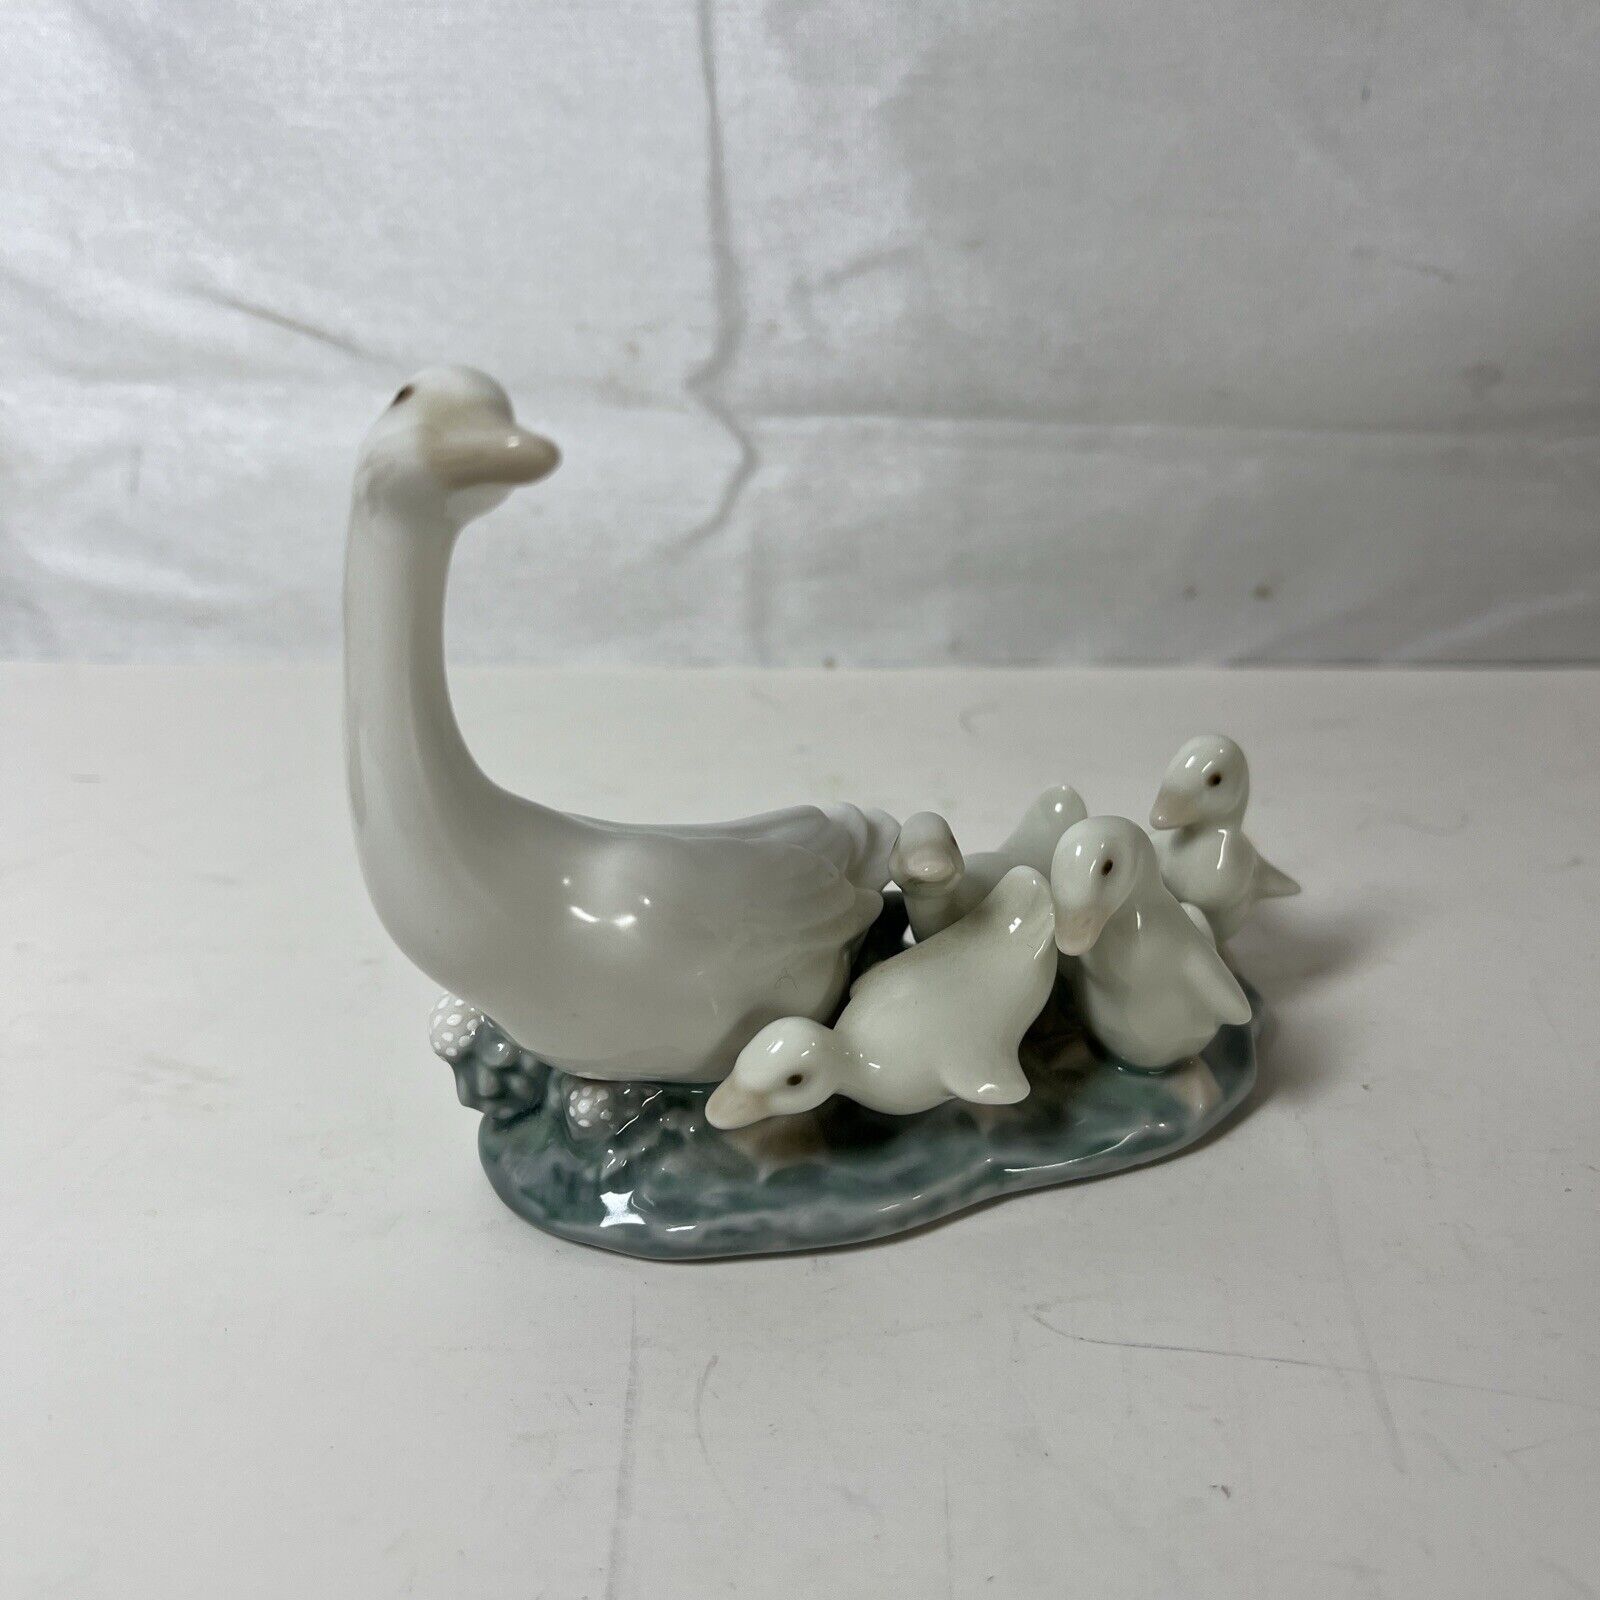 Lladro Porcelain Figurine Little Ducks After Mother Goose Ducklings Family #1307